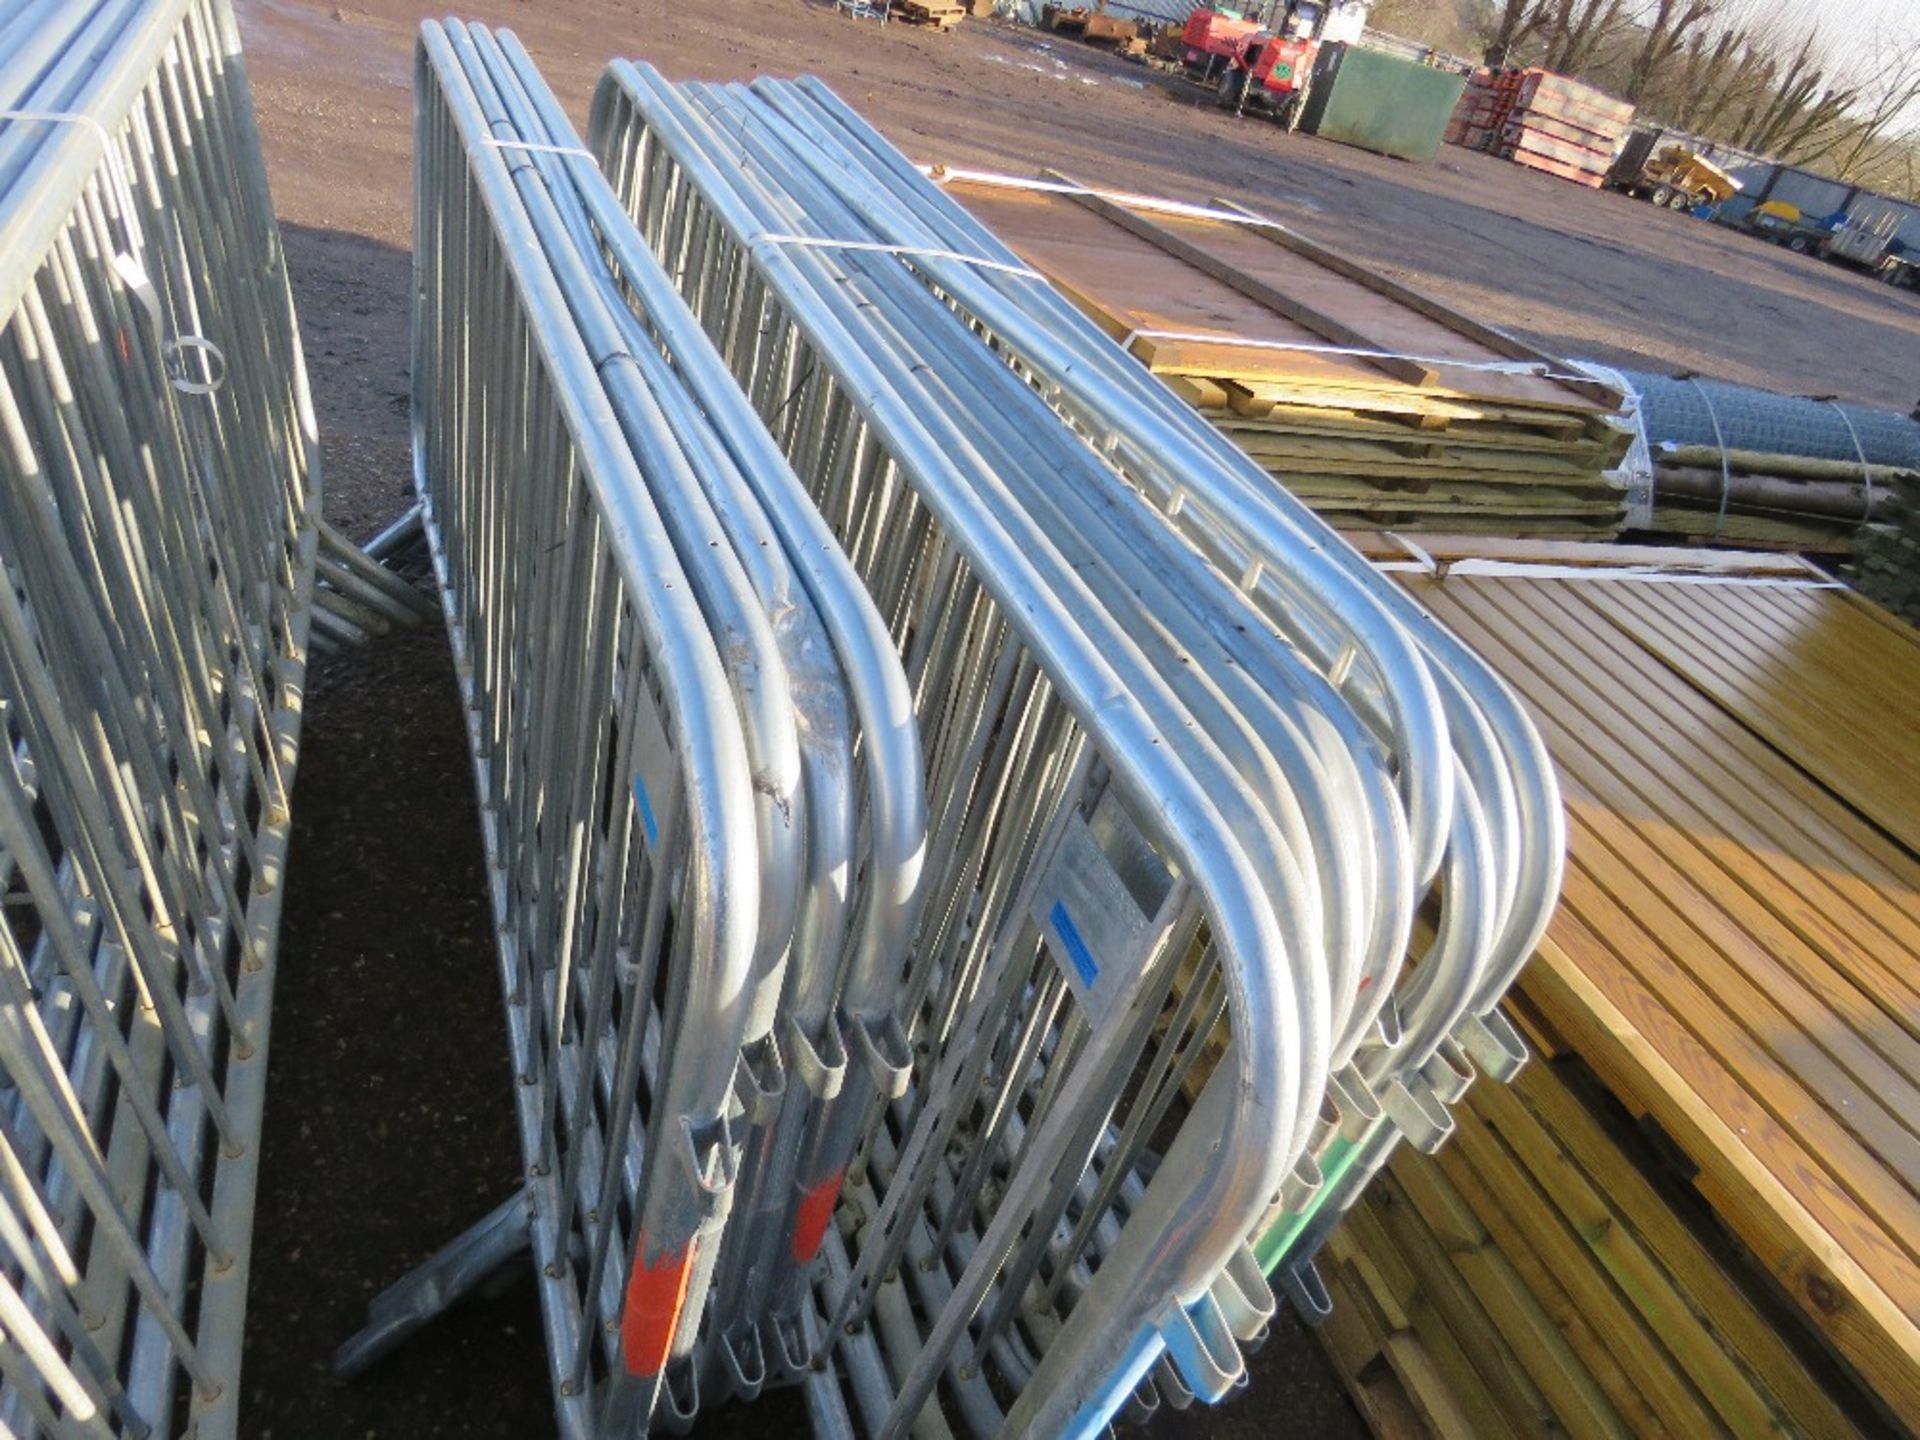 24 X STEEL PEDESTRIAN CROWD BARRIERS This items is being item sold under AMS…no vat will be on - Image 4 of 5